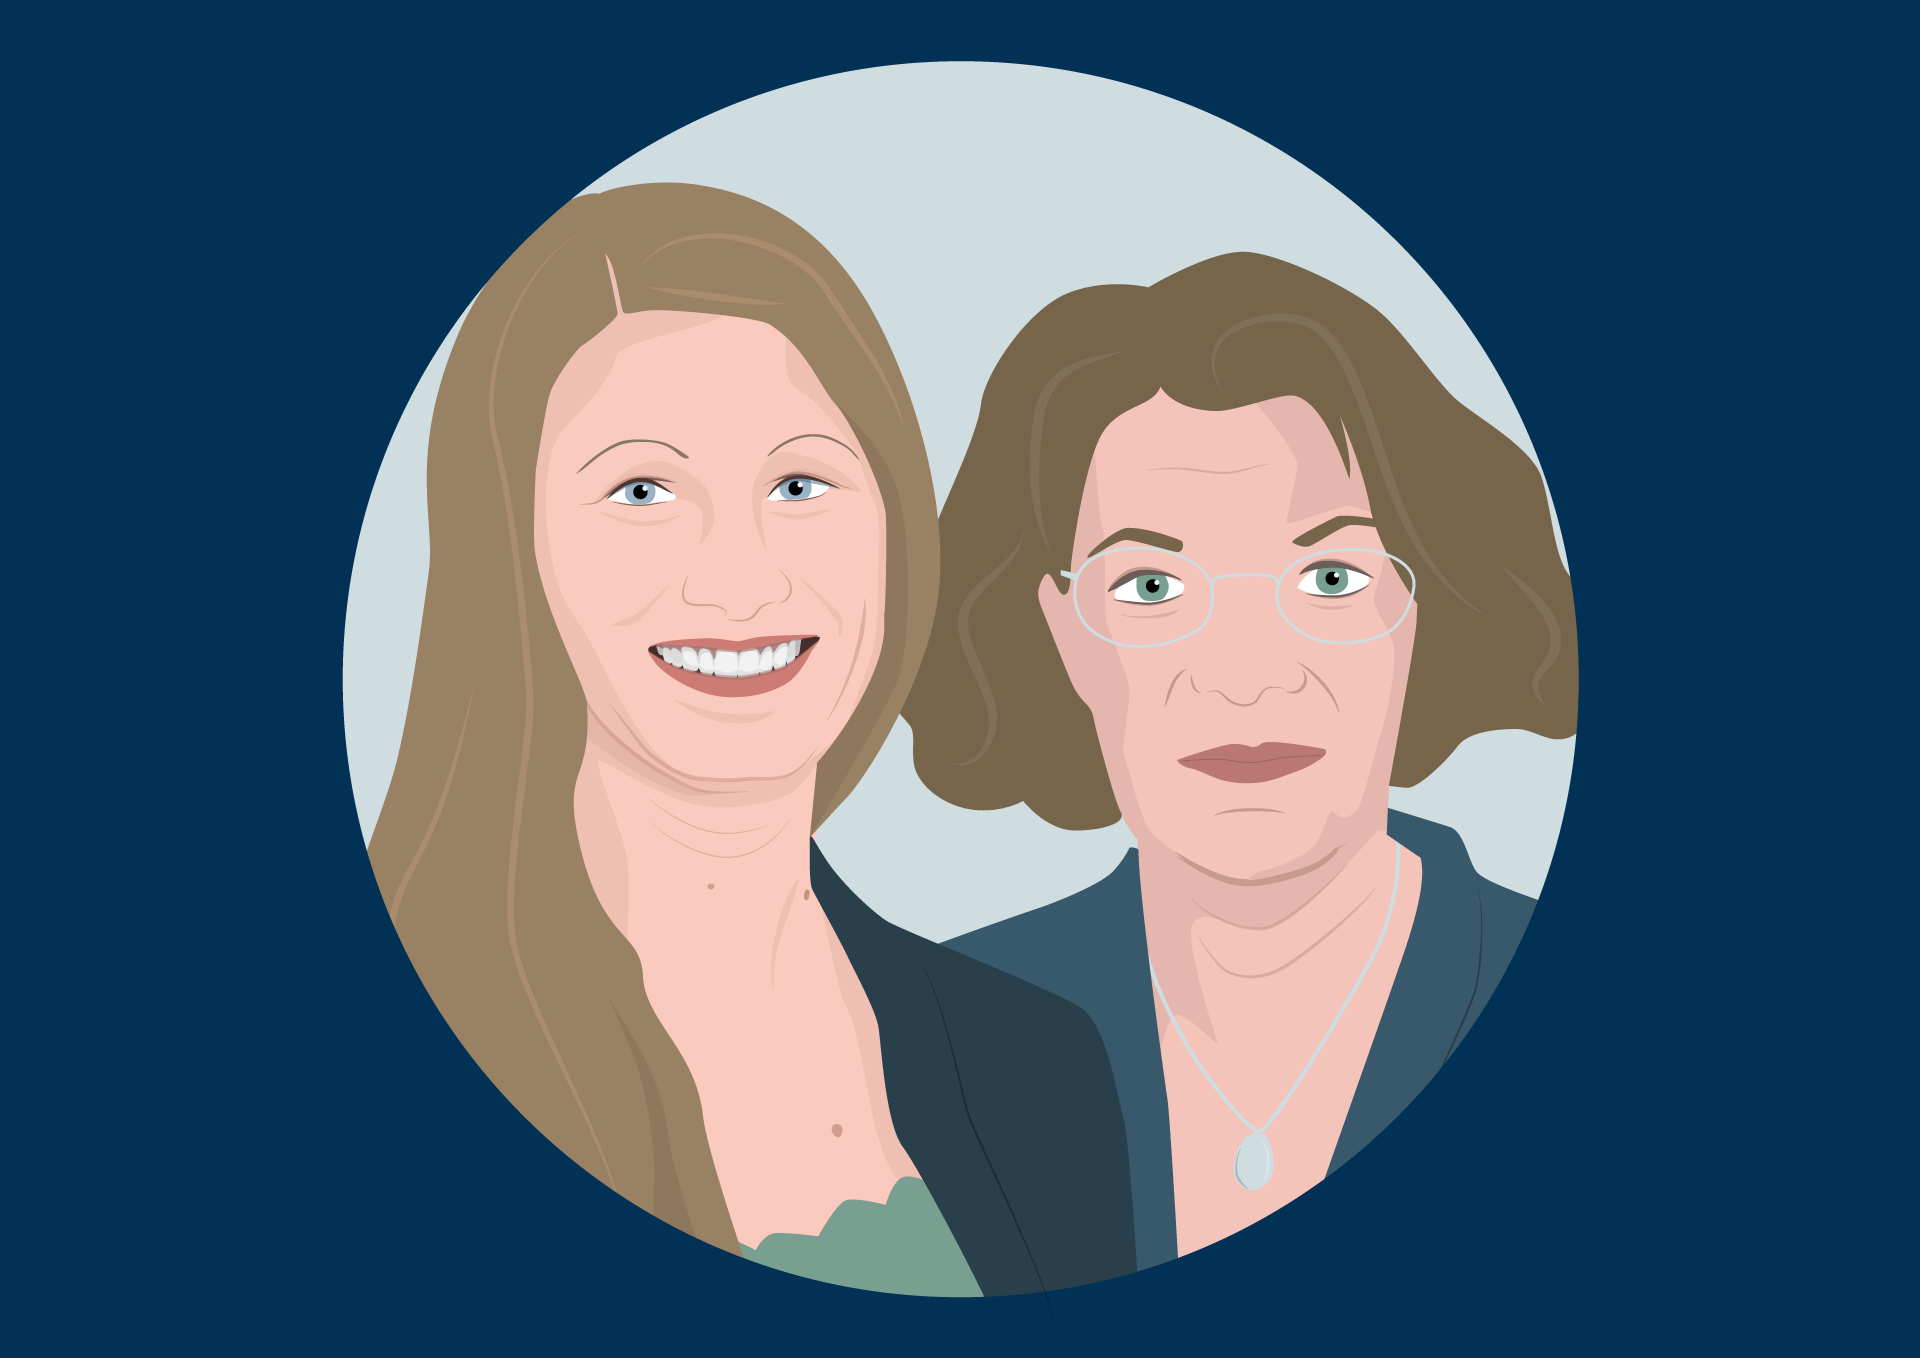 Anna Tengberg, from SIWI, and Thérèse Rudebeck, from WaterAid - illustration: Cecile Pillon Hue / SIWI